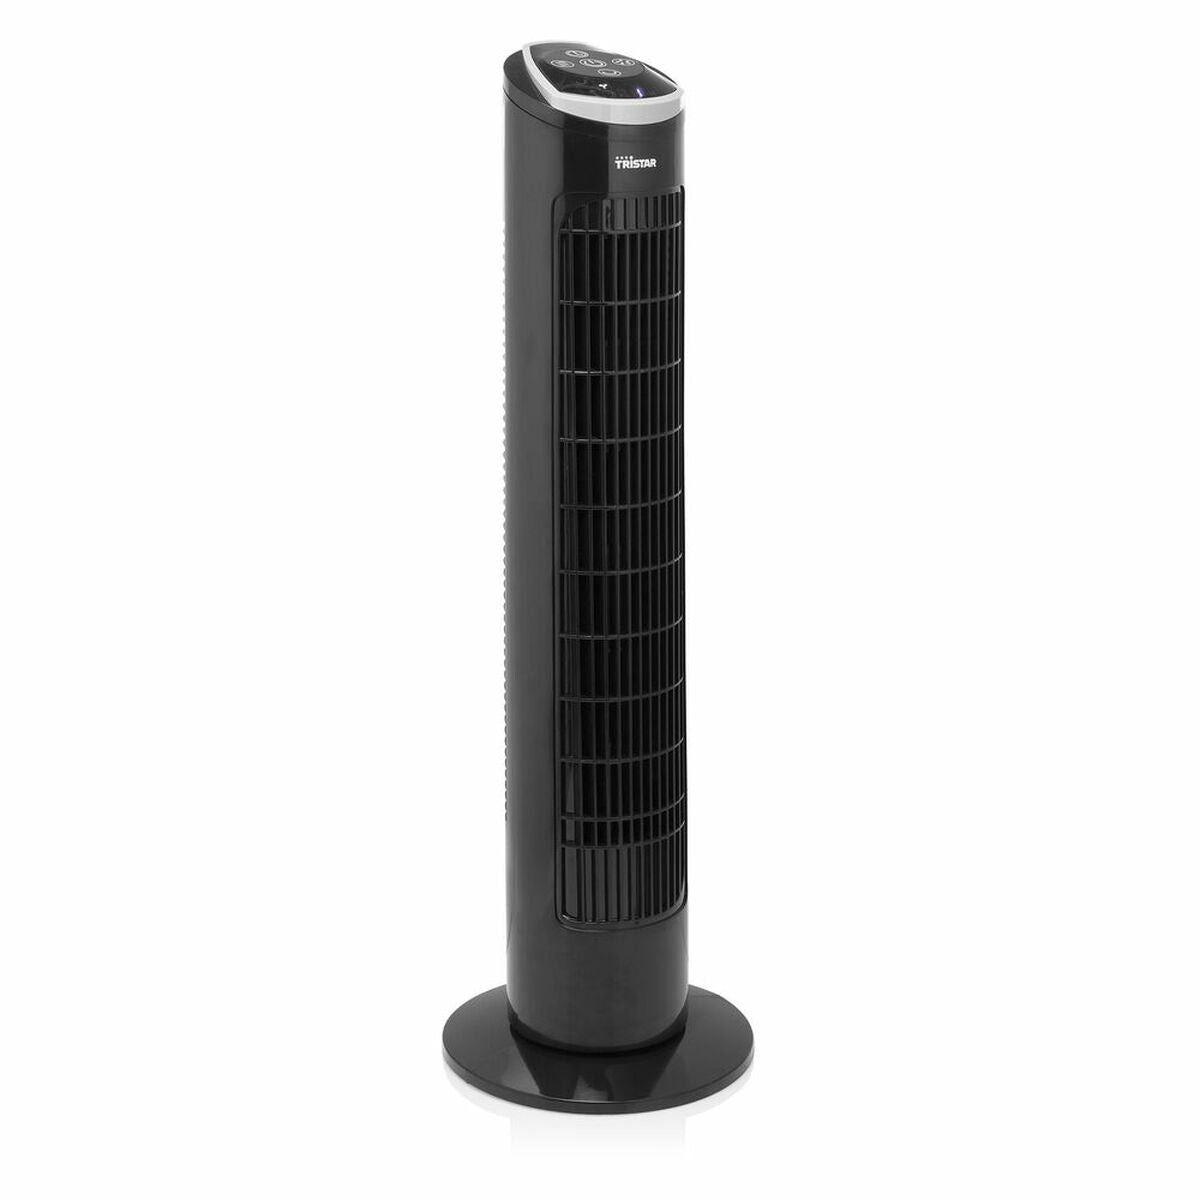 Floor Fan Tristar VE-5865 40W, Tristar, Home and cooking, Portable air conditioning, floor-fan-tristar-ve-5865-40w, Brand_Tristar, category-reference-2399, category-reference-2450, category-reference-2451, category-reference-t-19656, category-reference-t-21087, category-reference-t-25217, Condition_NEW, Price_50 - 100, small electric appliances, summer, RiotNook